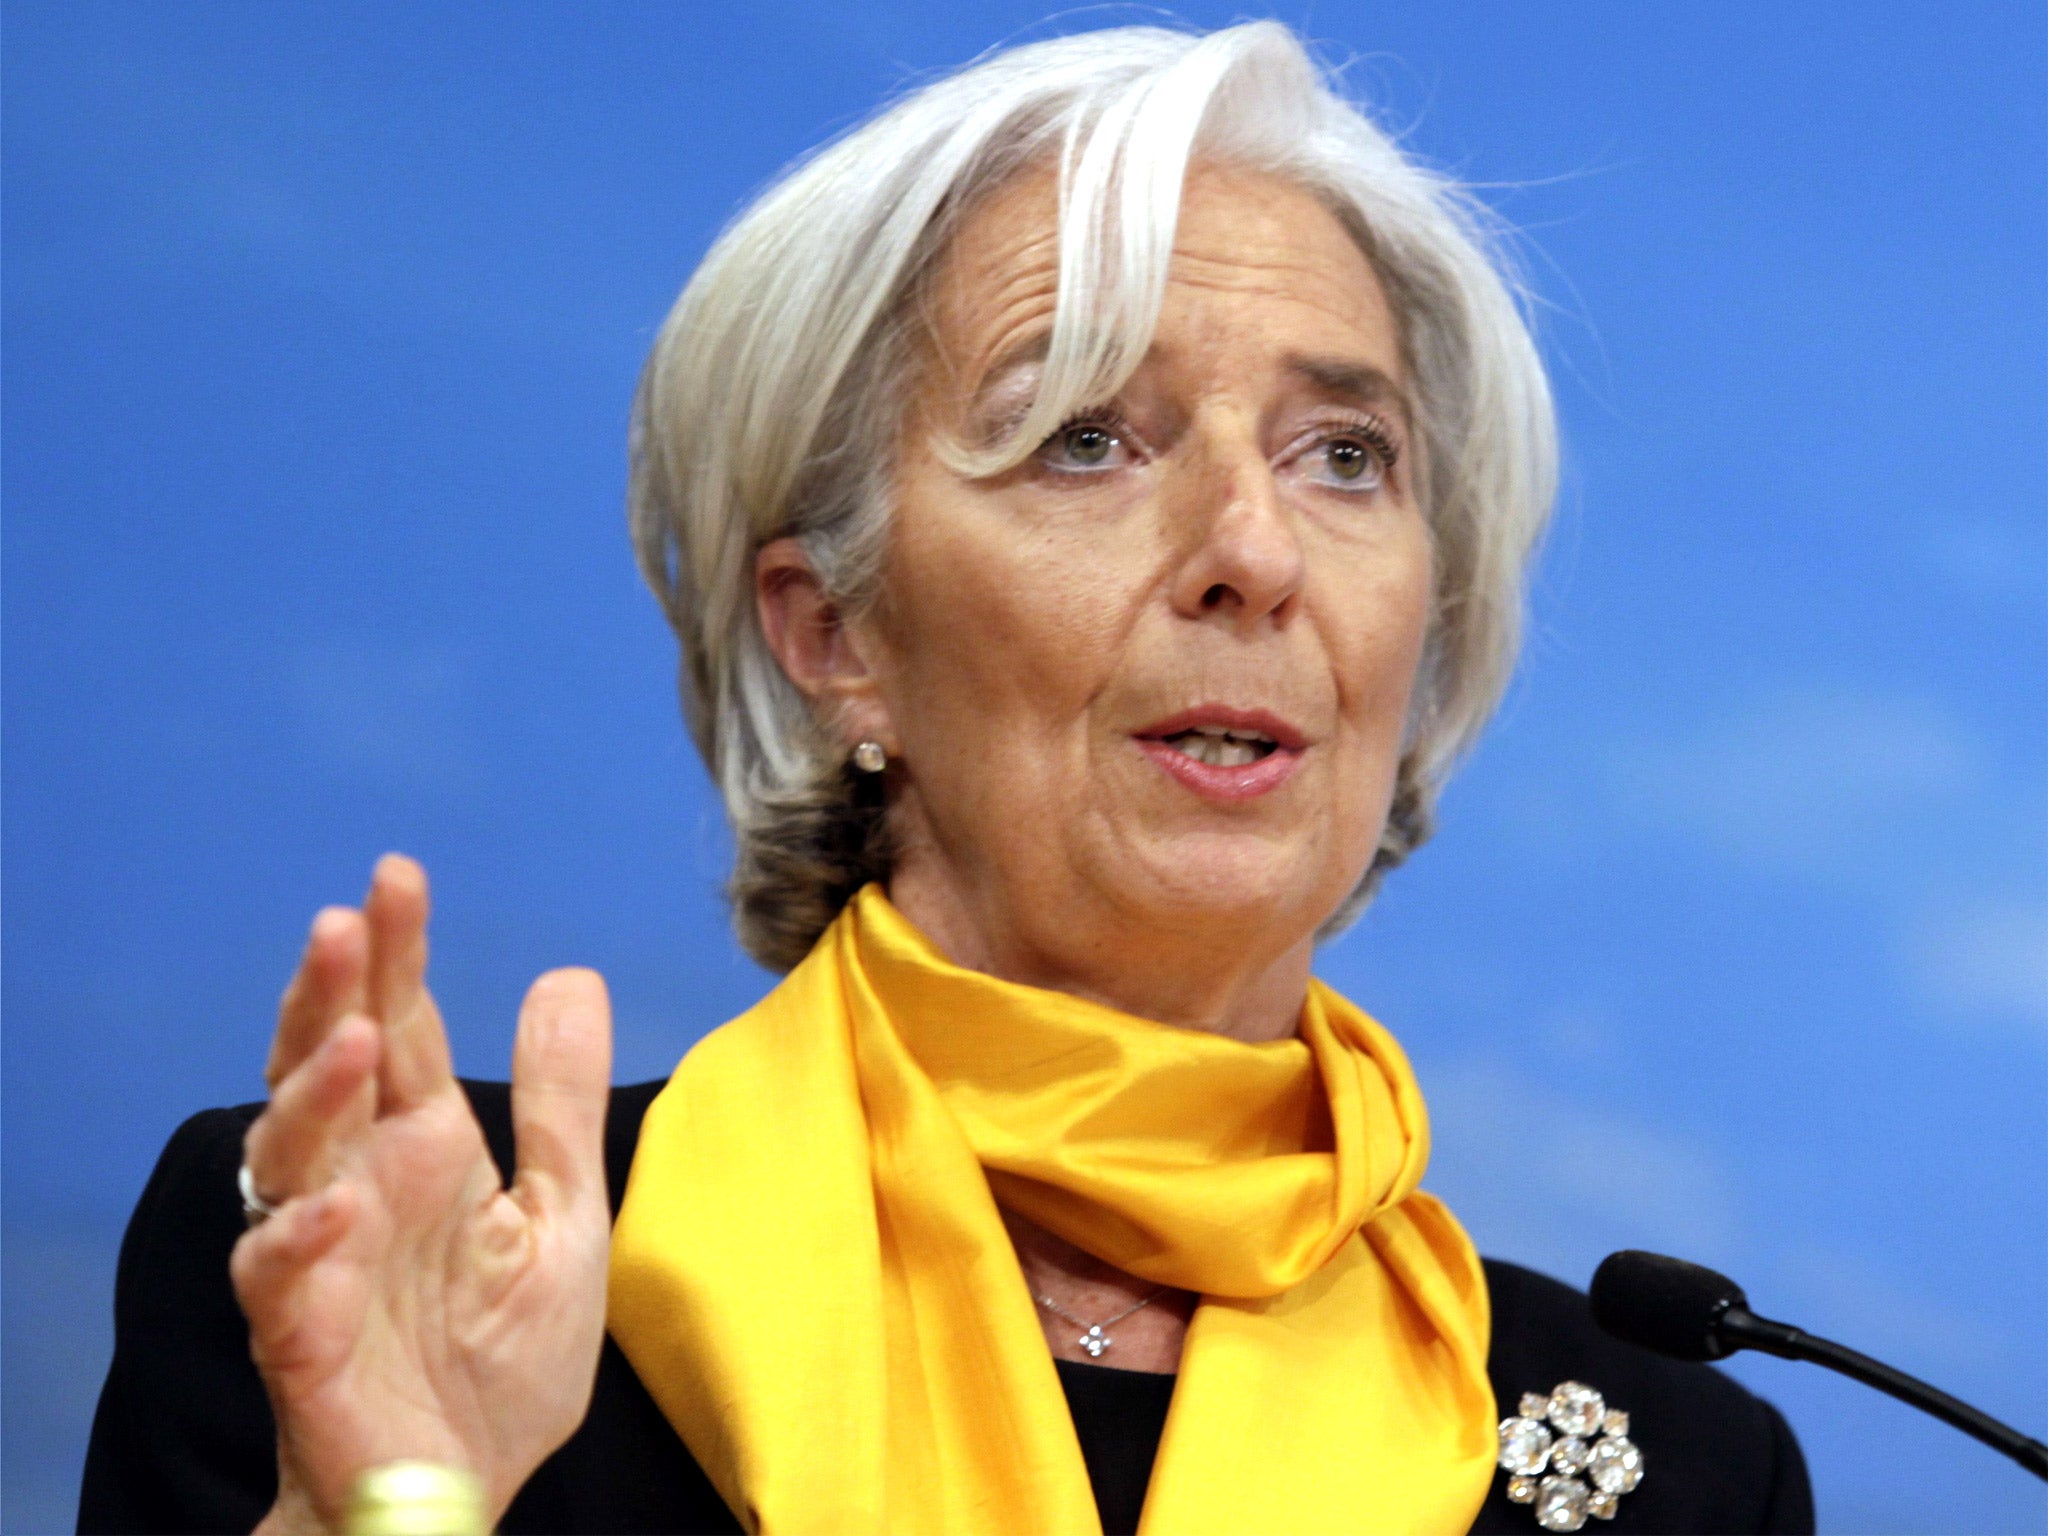 The IMF chief, Christine Lagarde, was responsible for rail as Finance Minister